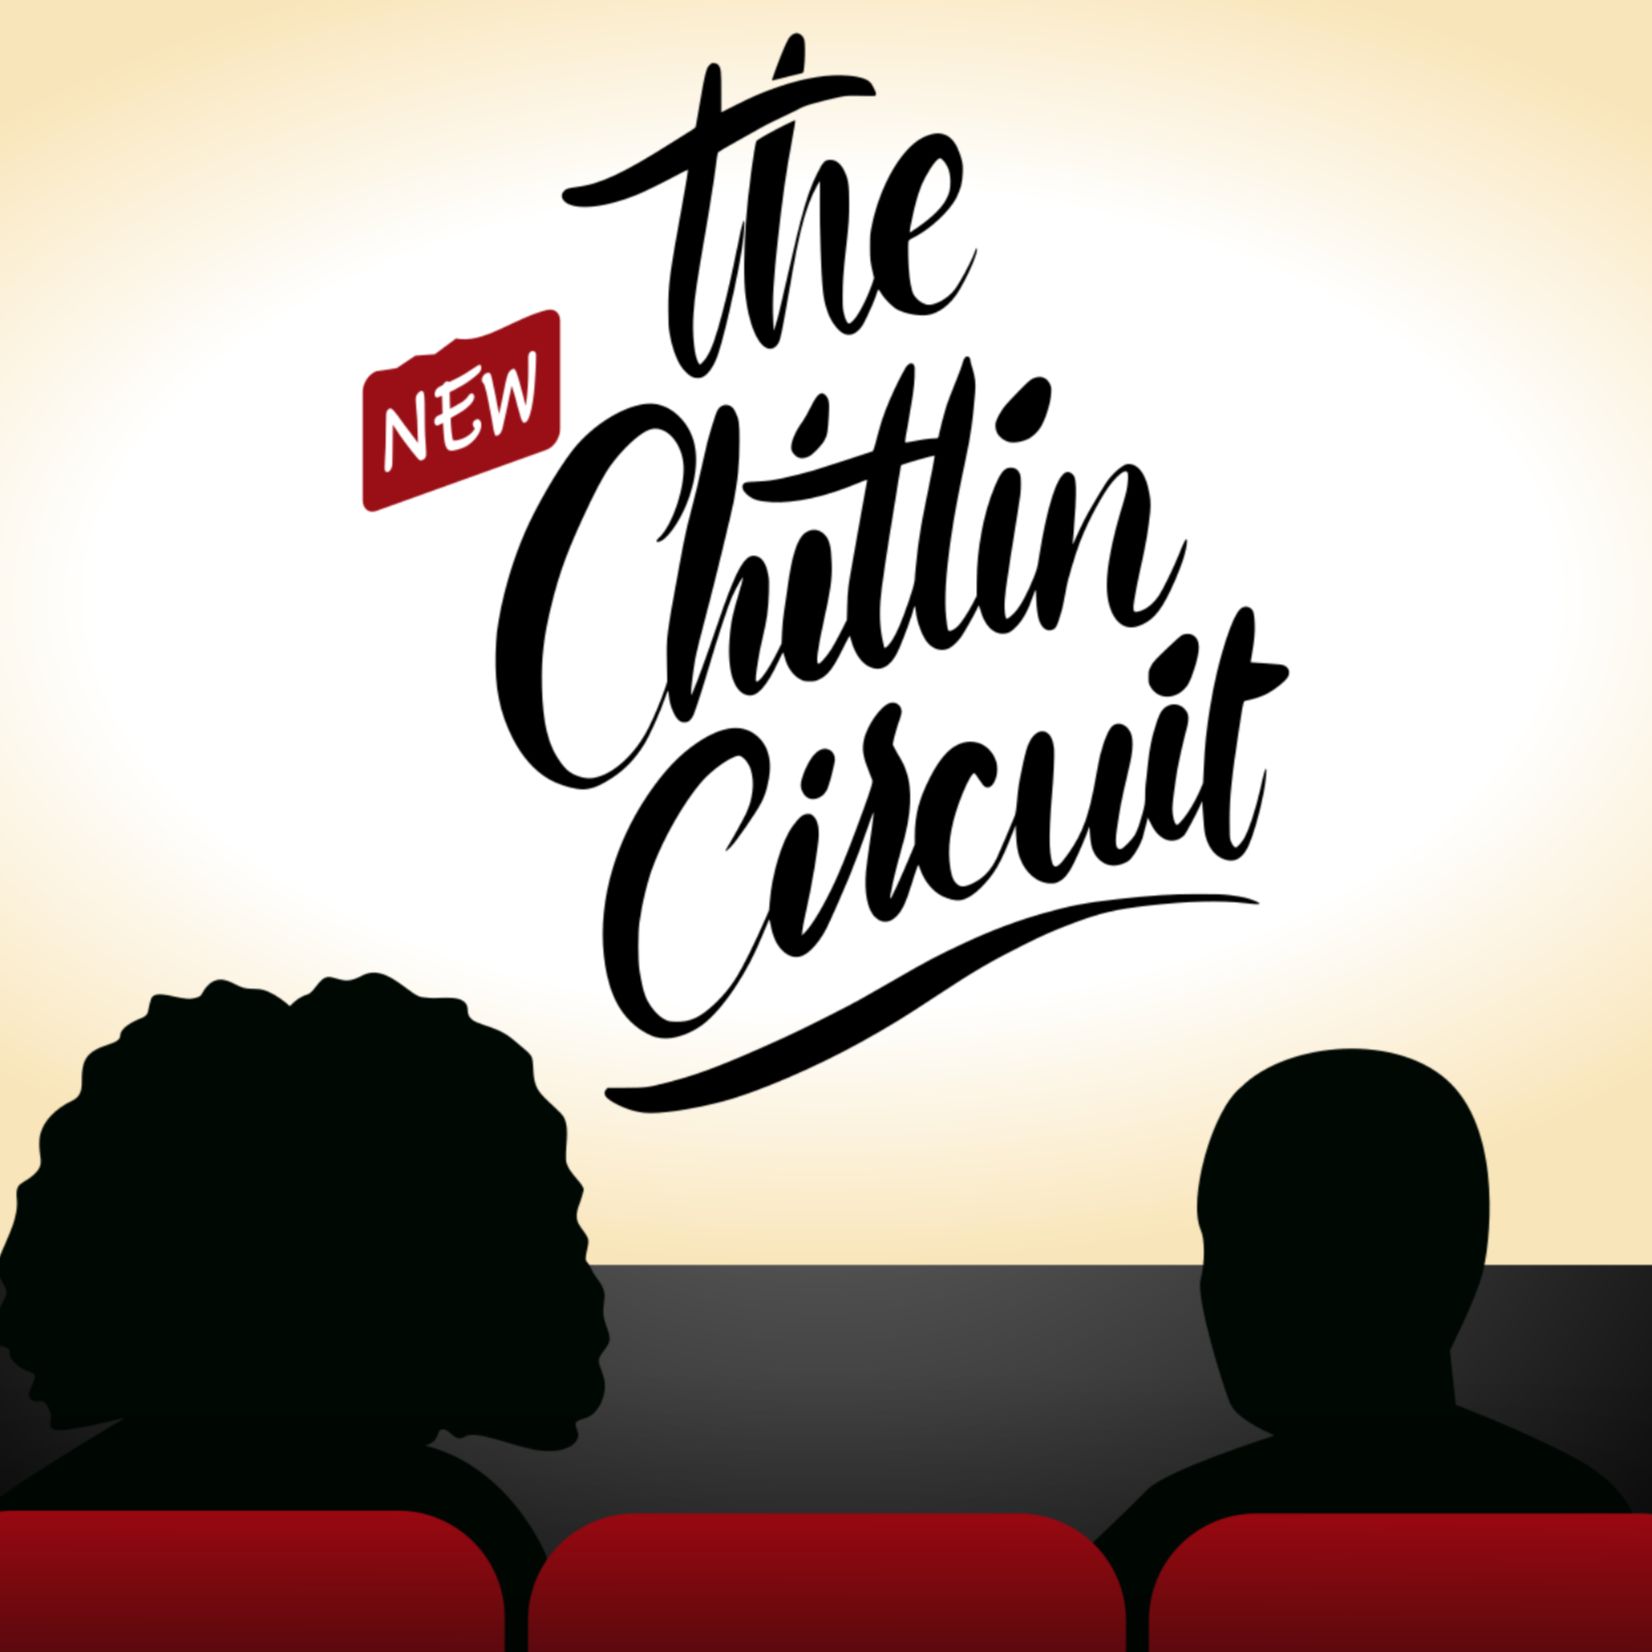 Artwork for podcast The New Chitlin Circuit